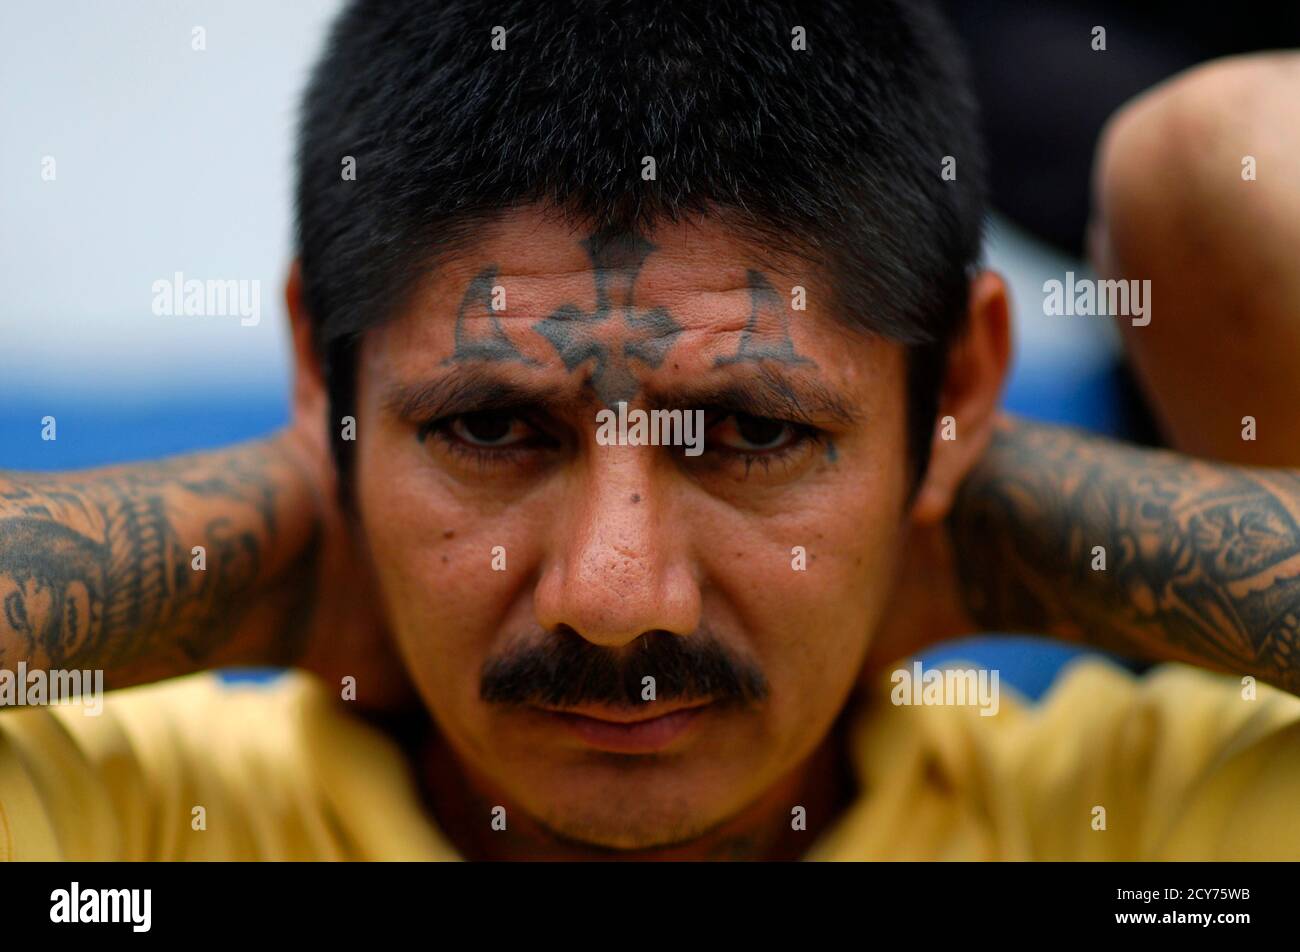 A gang member of Mara Salvatrucha (MS13) who was detained during a night raid is presented to the media in Soyapango, on the outskirts of El Salvador, June 21, 2012. At least 30 of the 160 gang members arrested during a raid late Wednesday were presented to the media by the National Civil Police (Policia Nacional Civil, PNC), local media reported. According to the government of El Salvador, since a truce was signed between MS13 and 18 gangs, daily crimes have dropped from 15 cases to five. REUTERS/Ulises Rodriguez (EL SALVADOR - Tags: CRIME LAW) Stock Photo